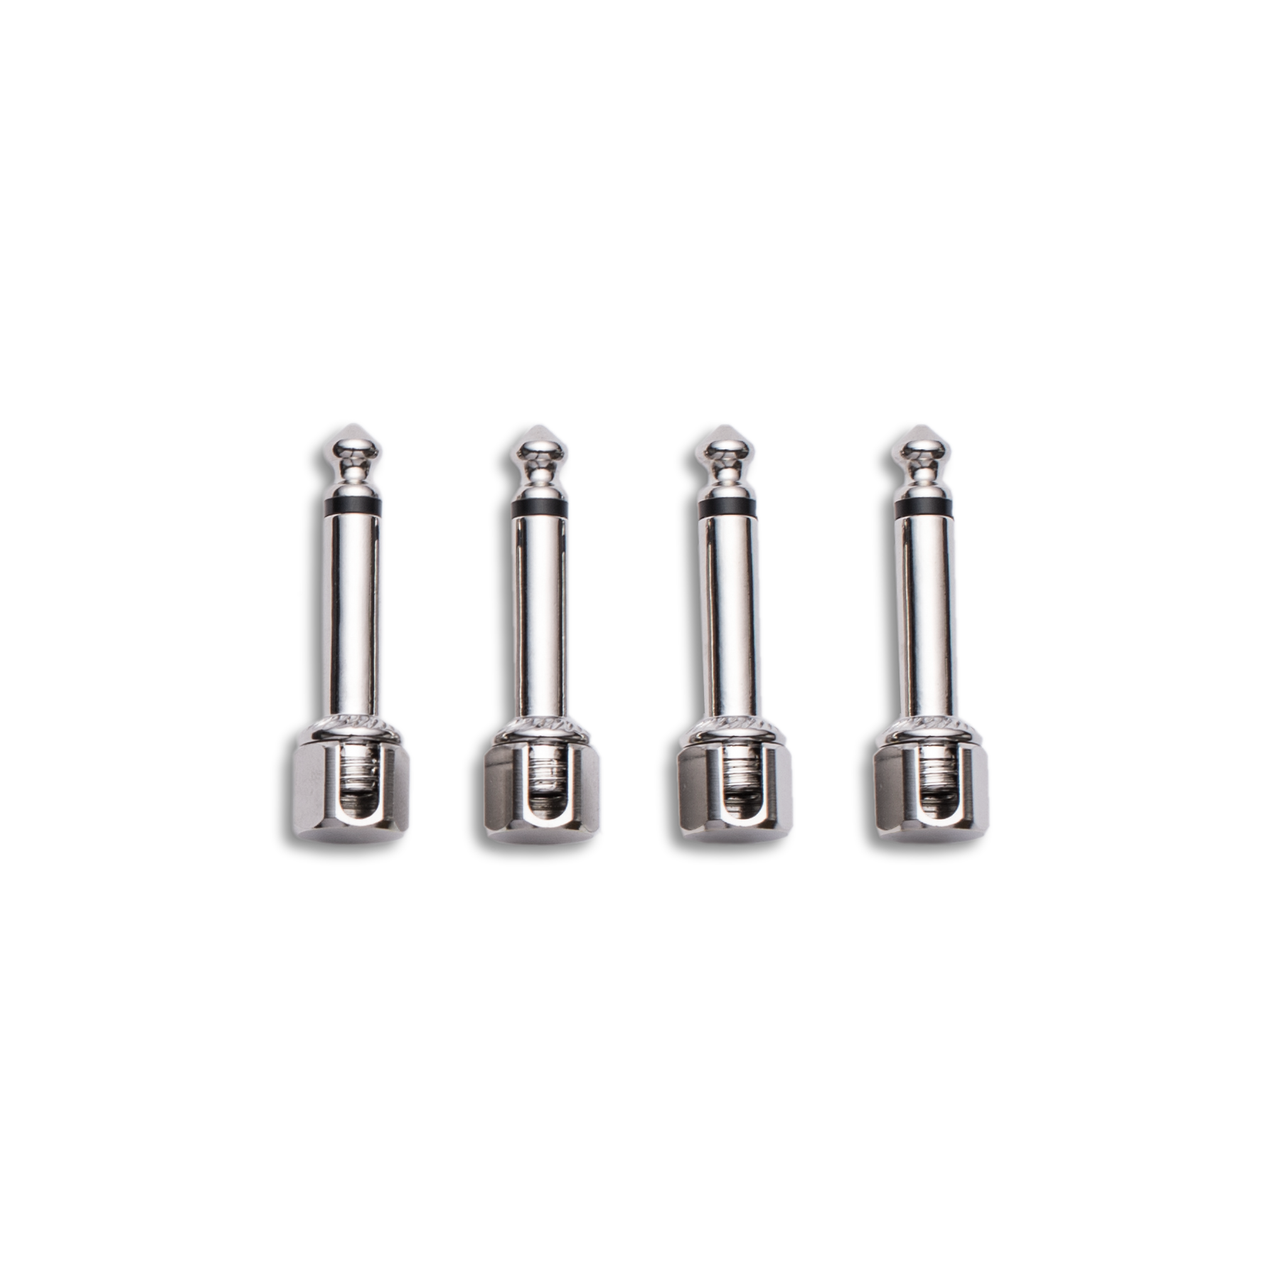 4 x Evidence Audio Right-Angled SIS Plug with Silver Cap